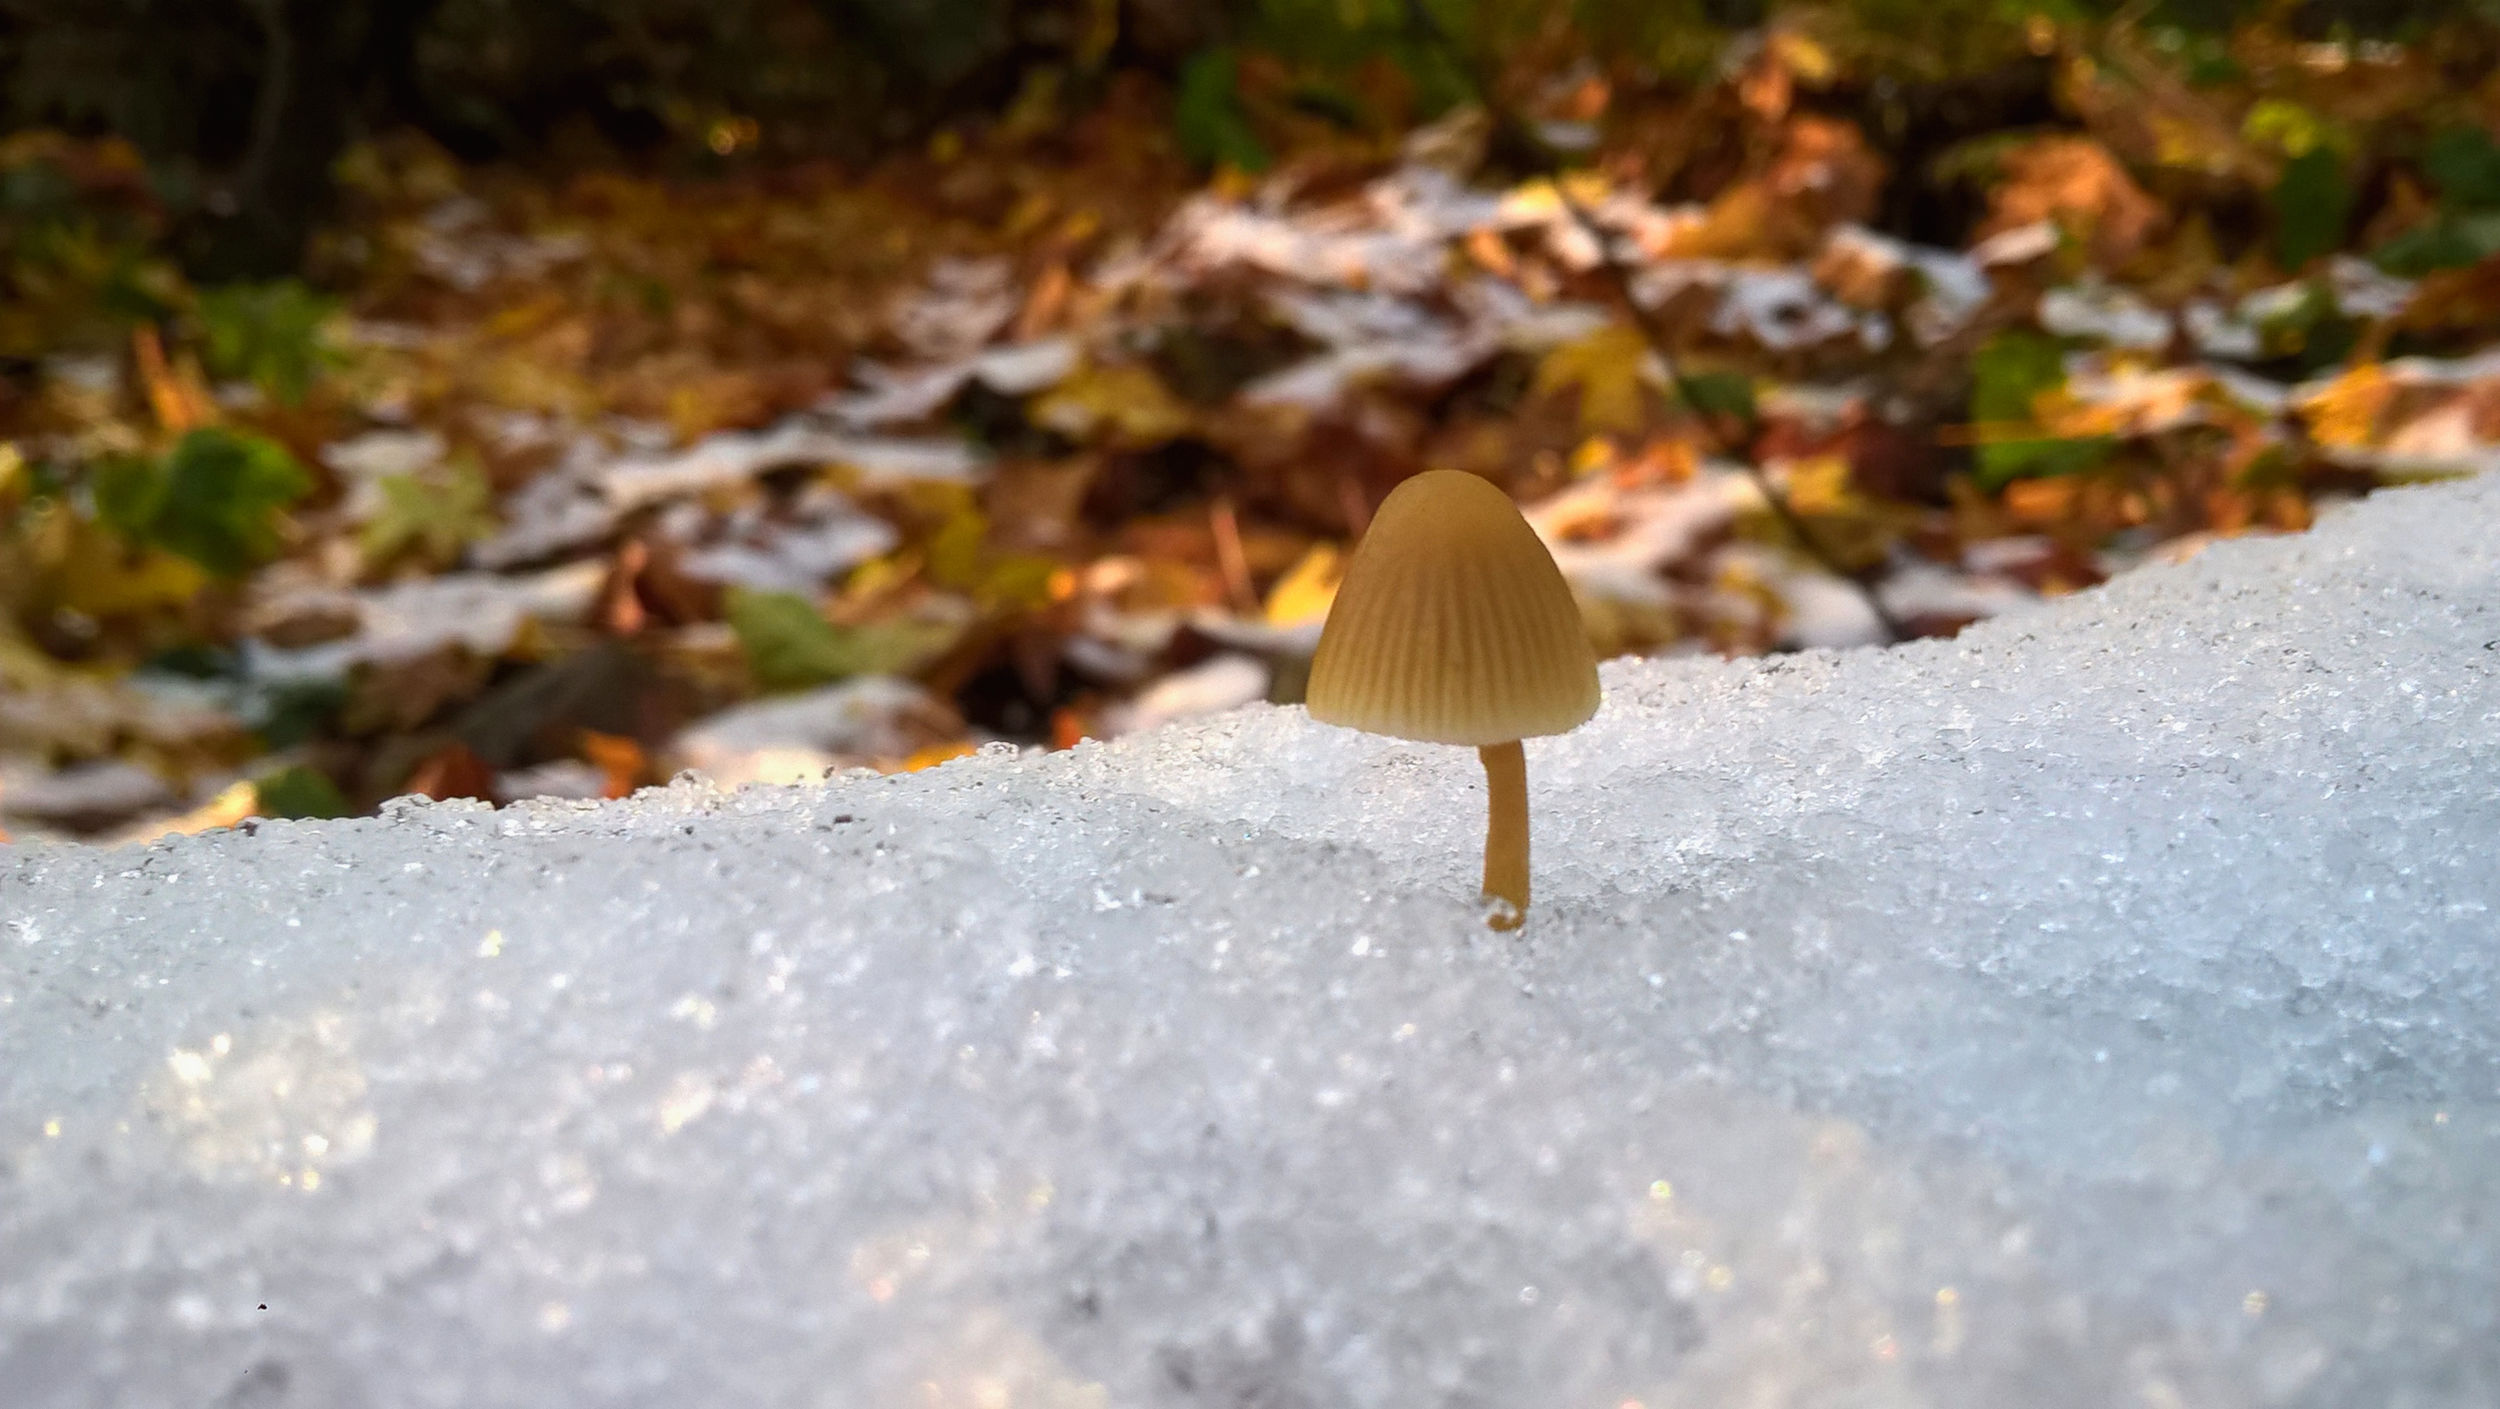 small brown mushroom poking through a patch of icy snow on the forest floor